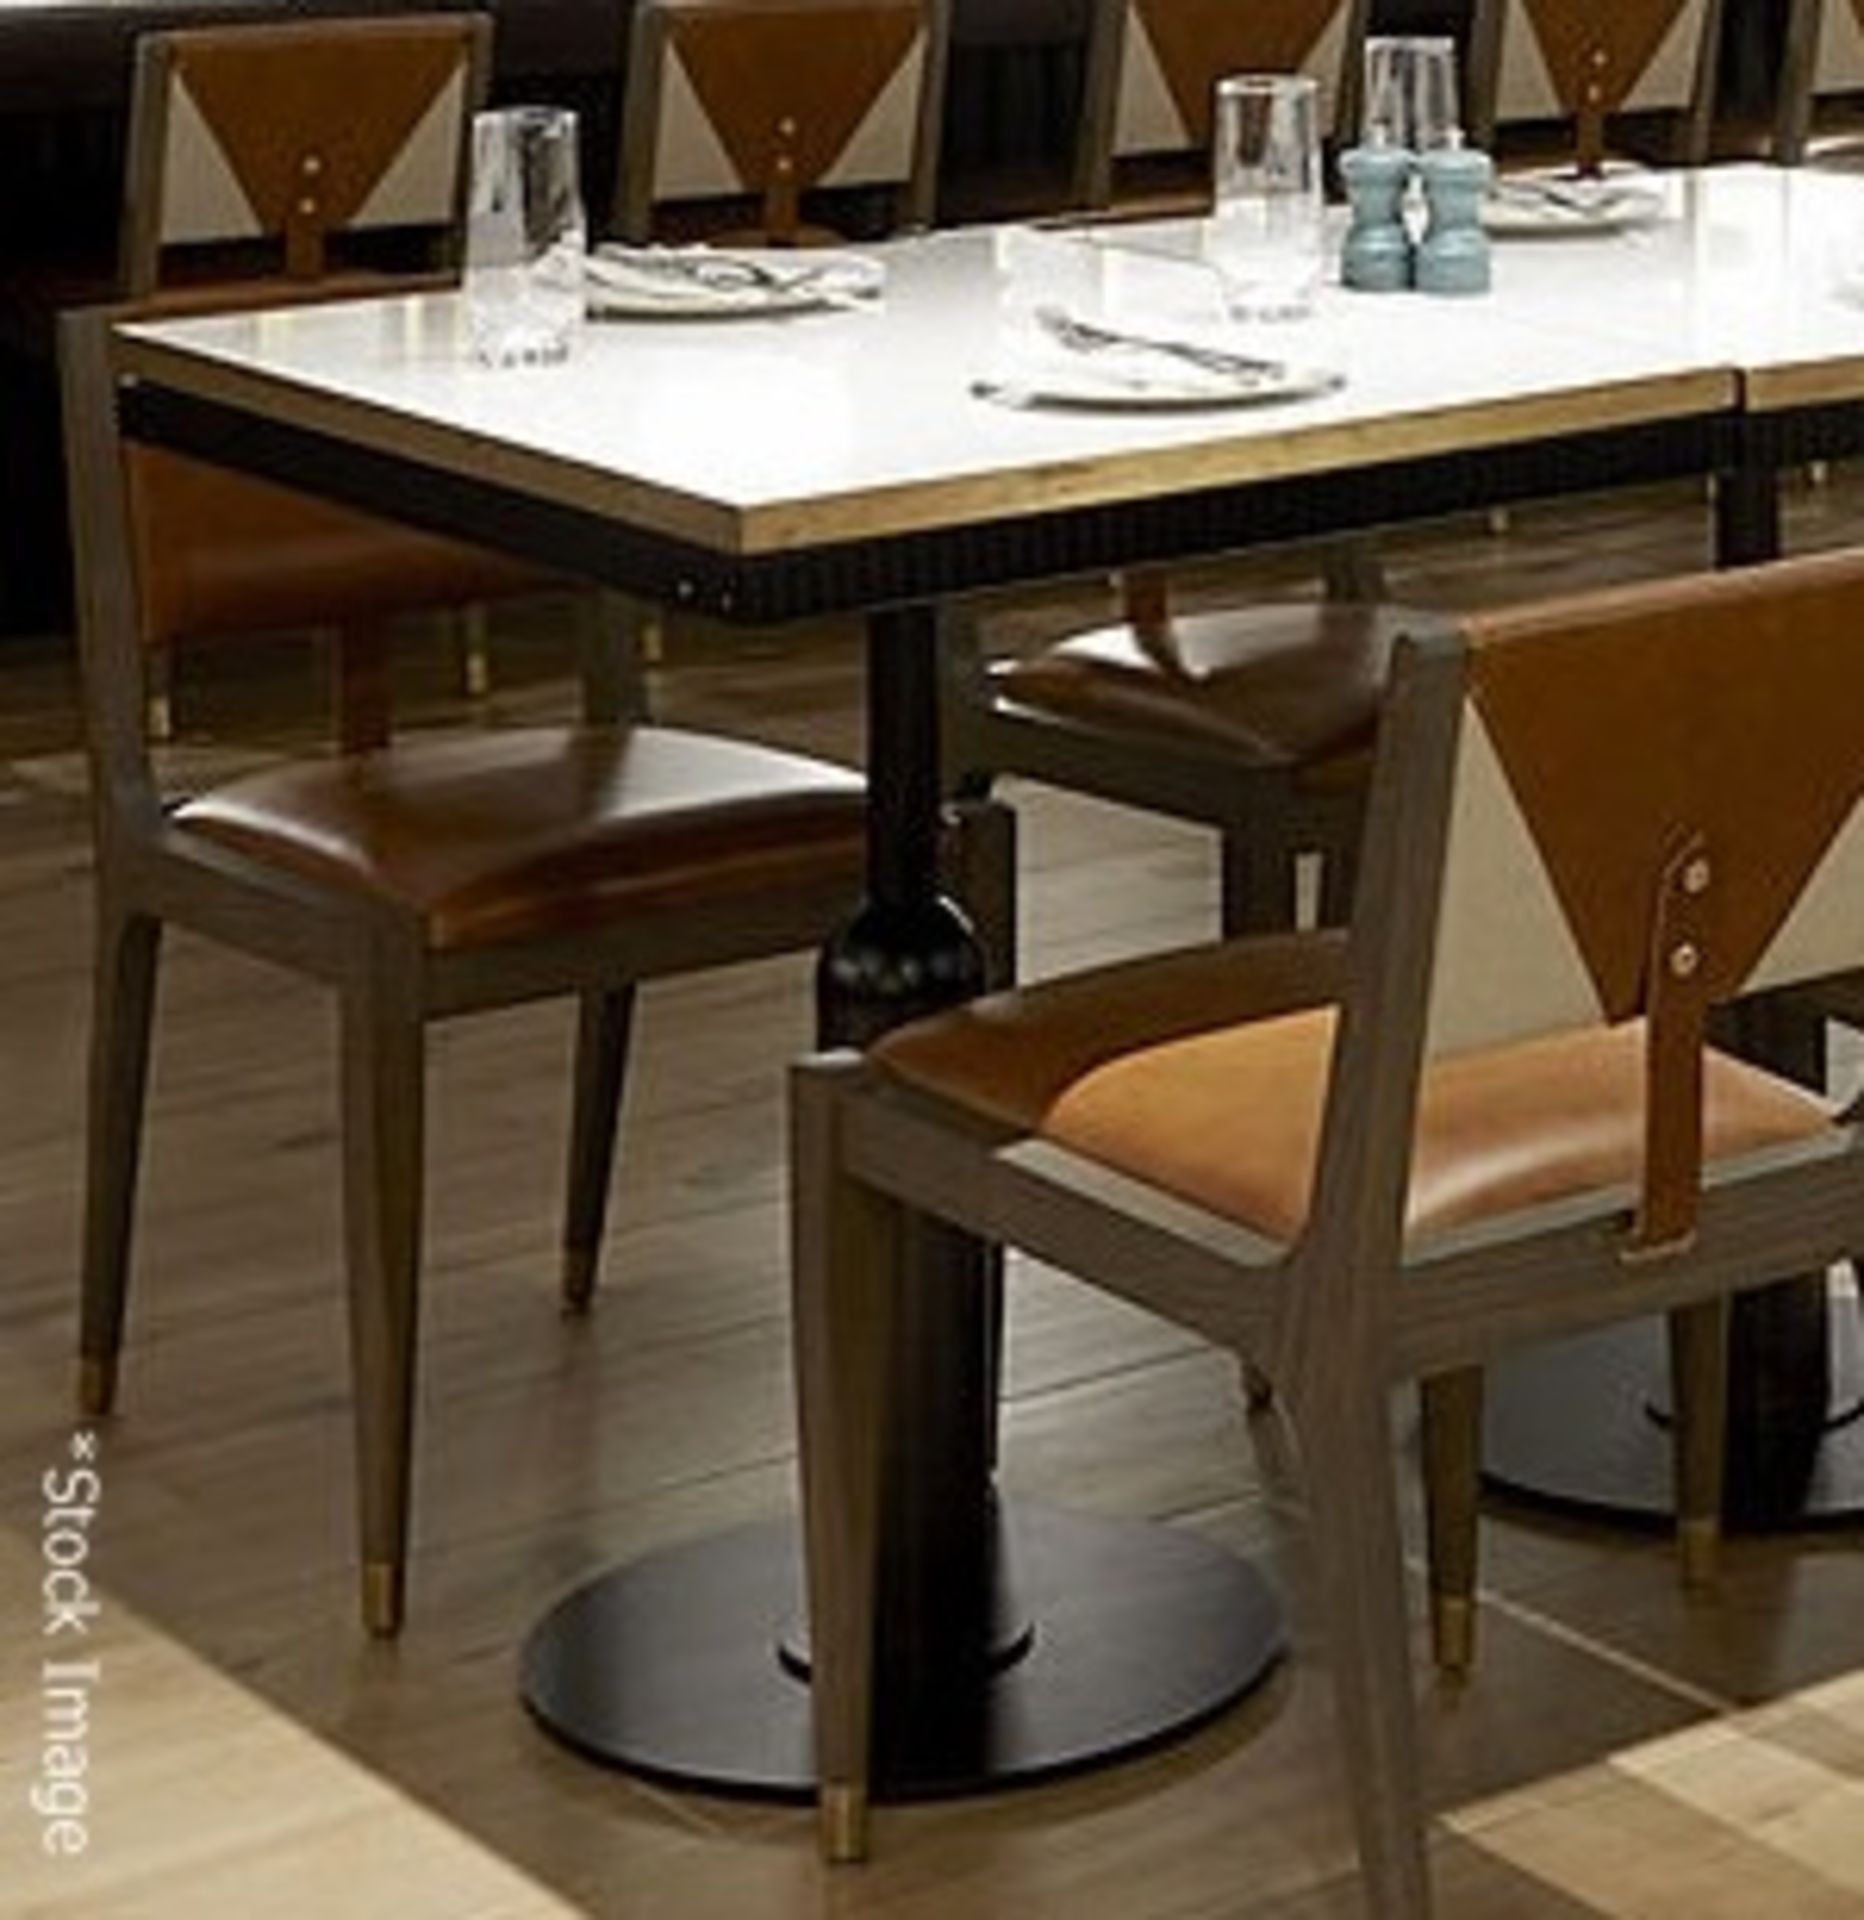 1 x Specially Commissioned Industrial-Style Marble-Topped Square Bistro Table With A Brass Trim - - Image 2 of 5